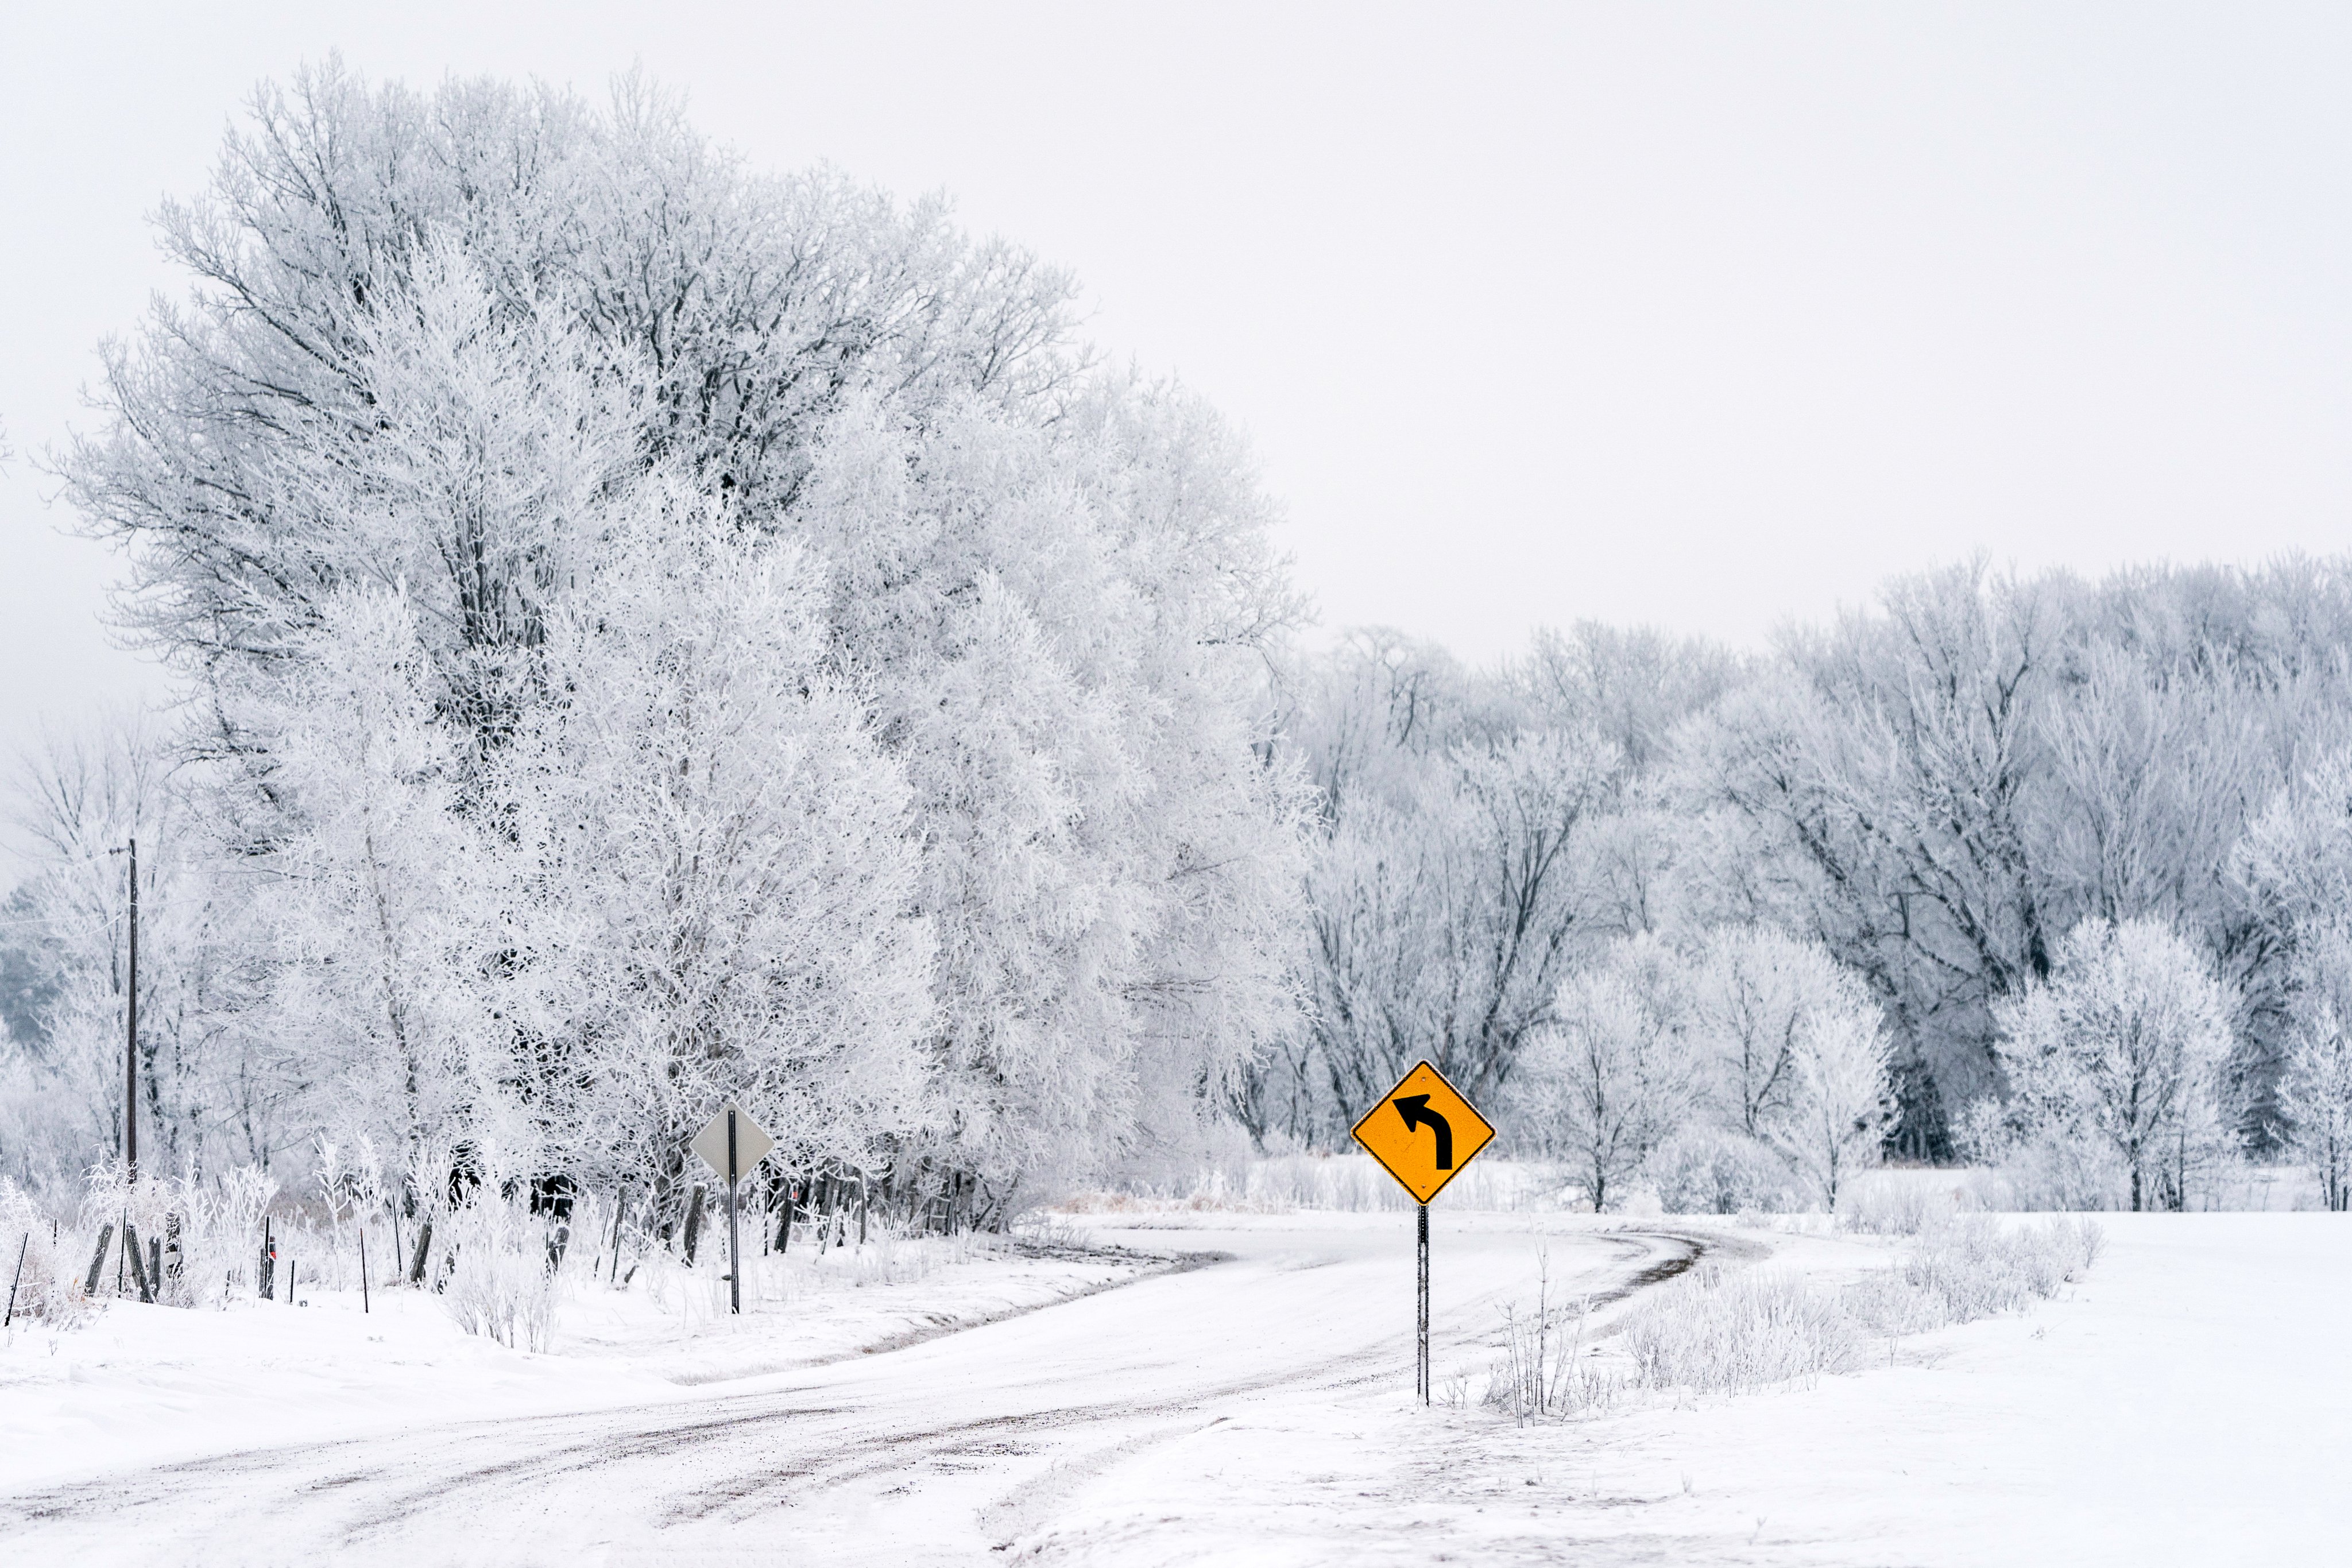 2nd Place Hoarfrost covered trees along the Great River Road in Aitkin County, Minnesota by Lorie Shaull @Lorie_Shaull